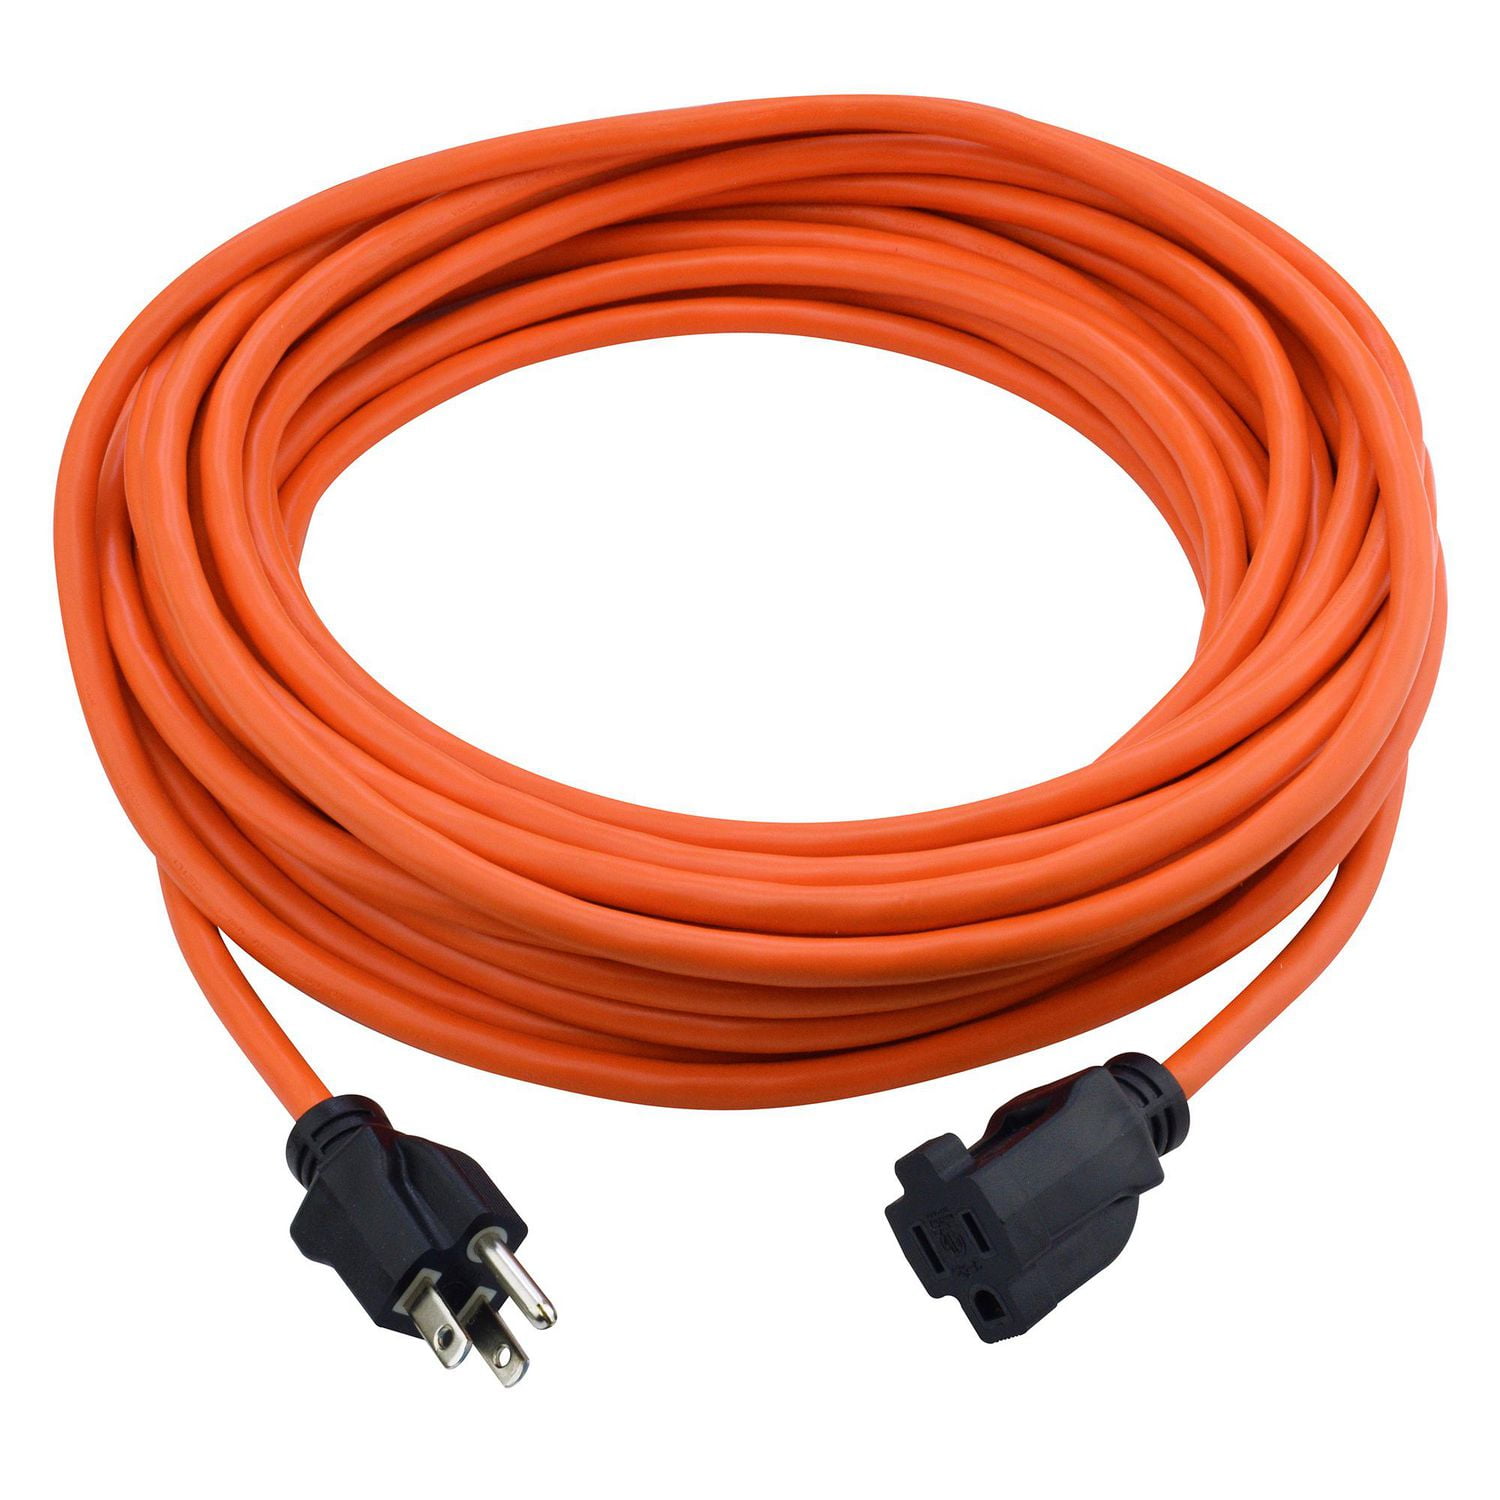 Prime Wire & Cable 15m (49.2ft) Outdoor Extension Cord, 15m (49.2